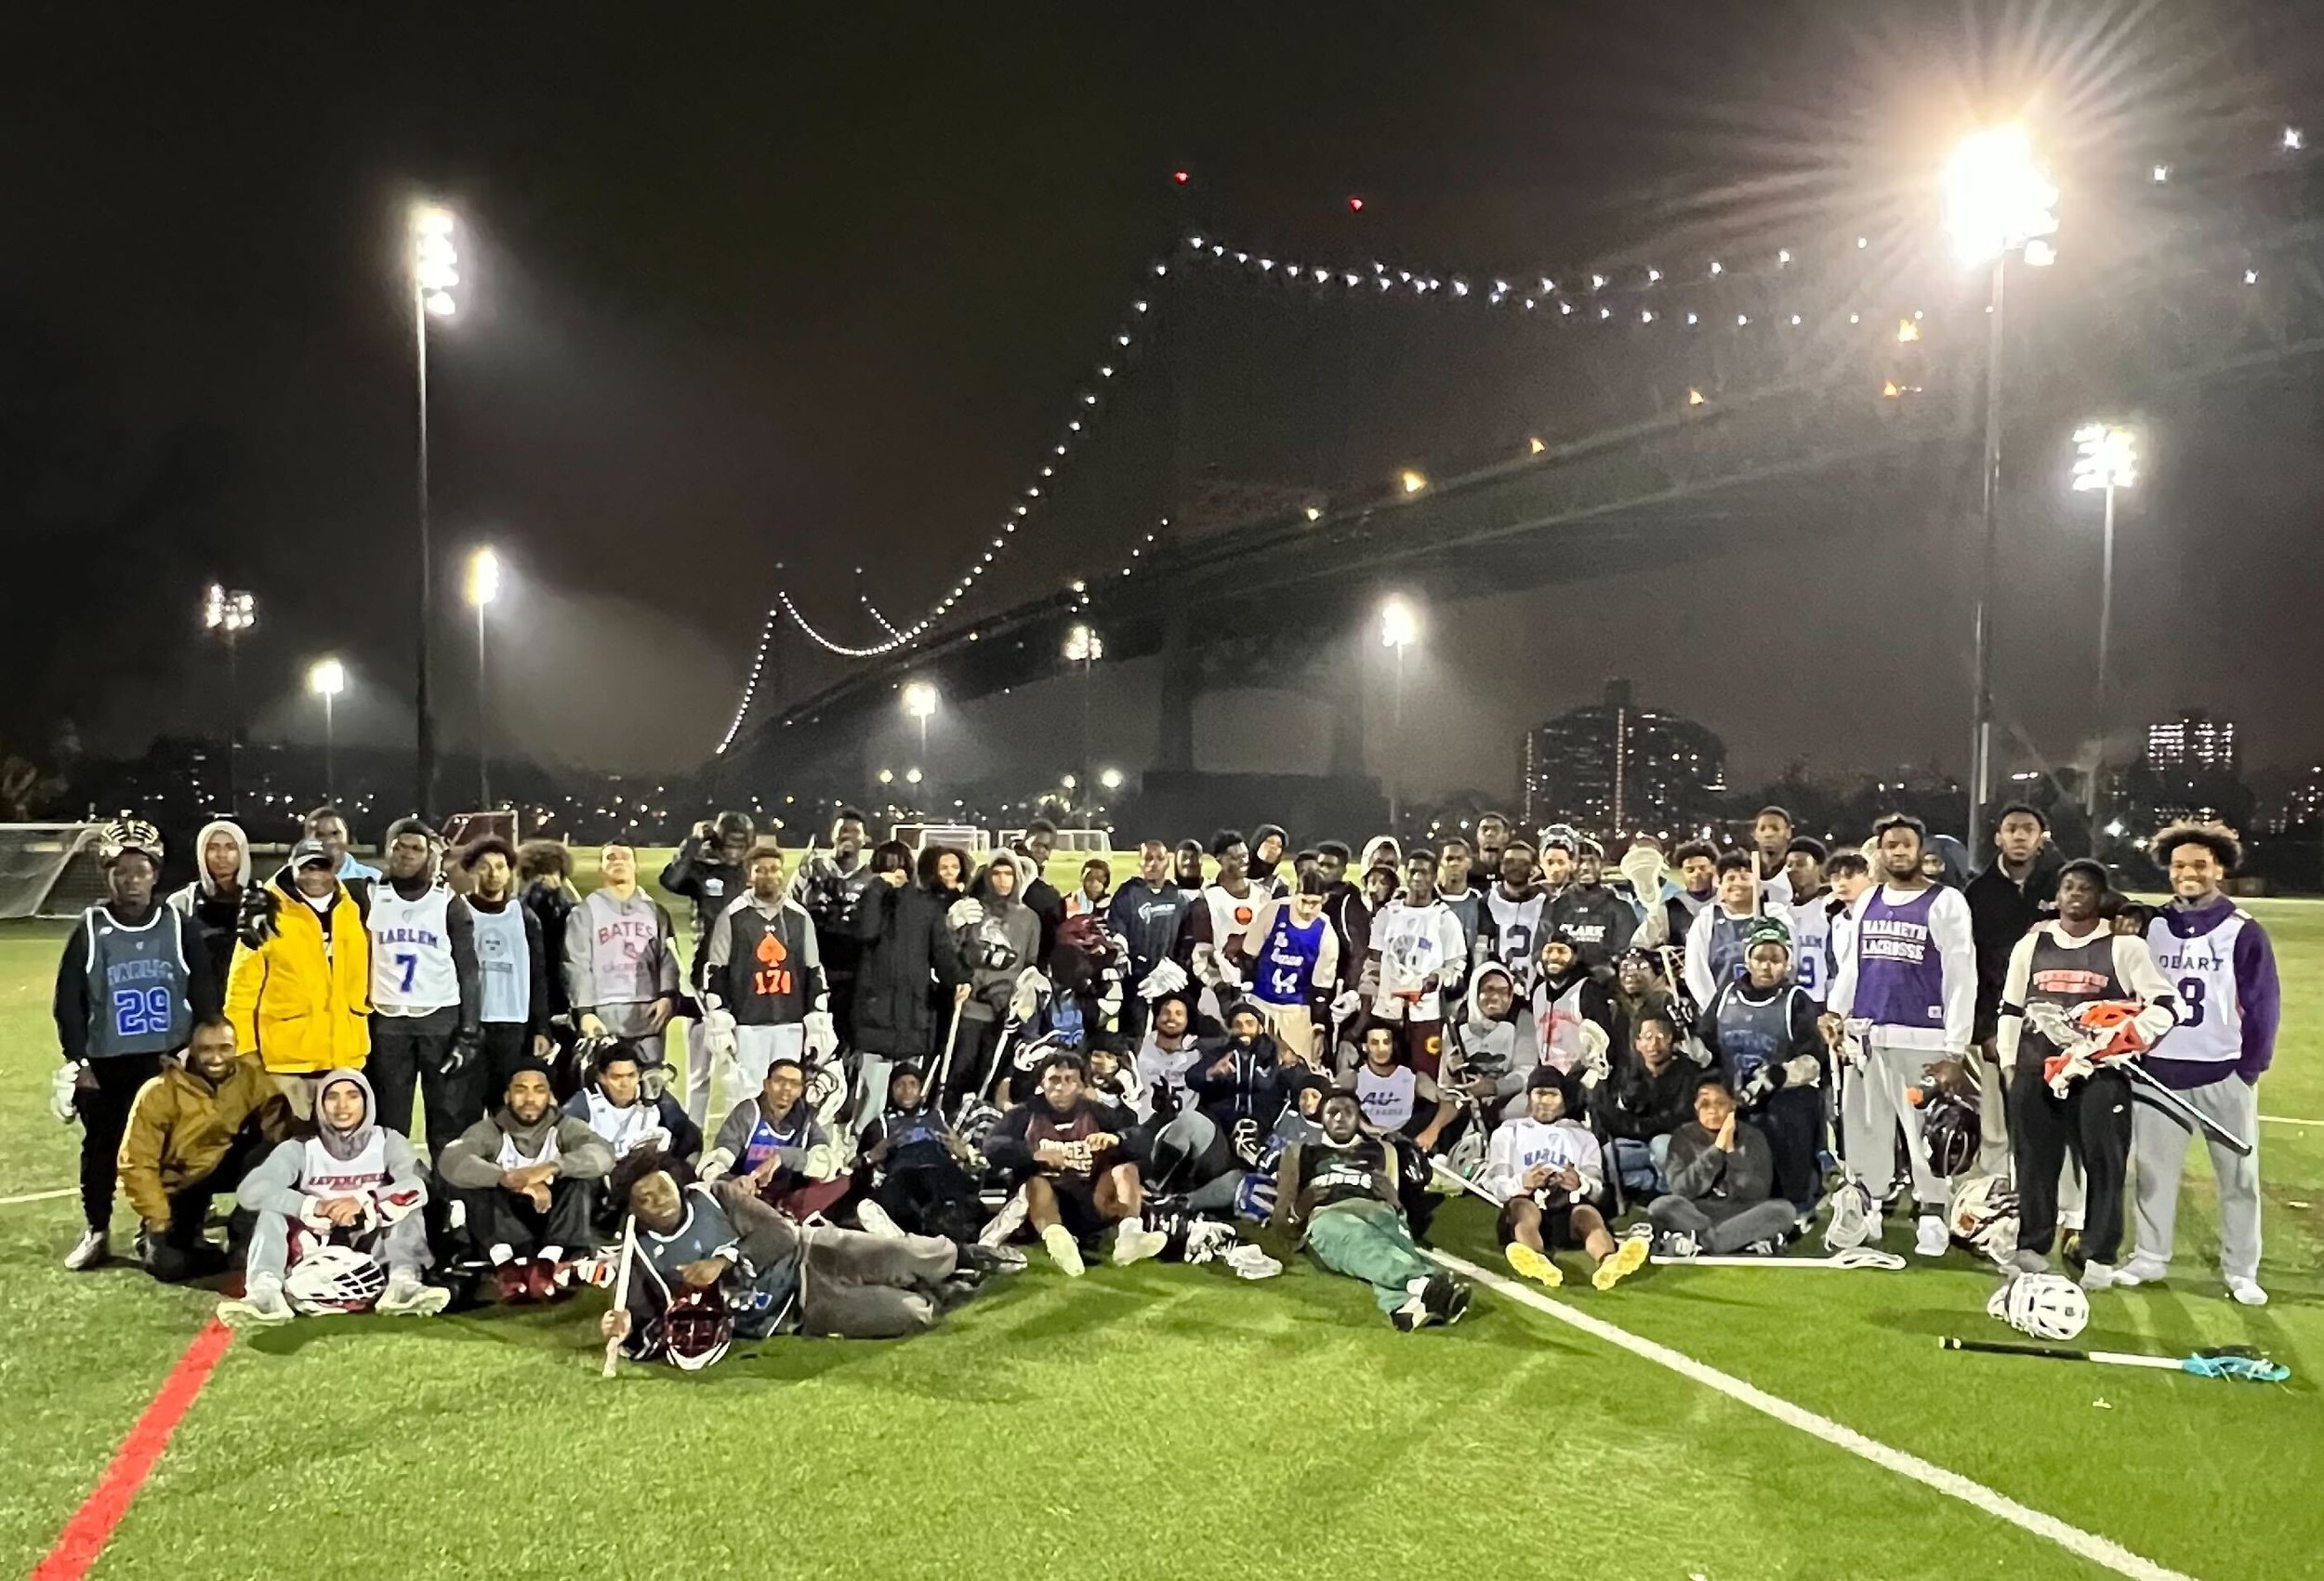  Earlier this winter, more than 40 alums returned to Randall’s Island in New York City for our biggest ever alumni game. Many of these students will be taking the field as college lacrosse players this spring.  